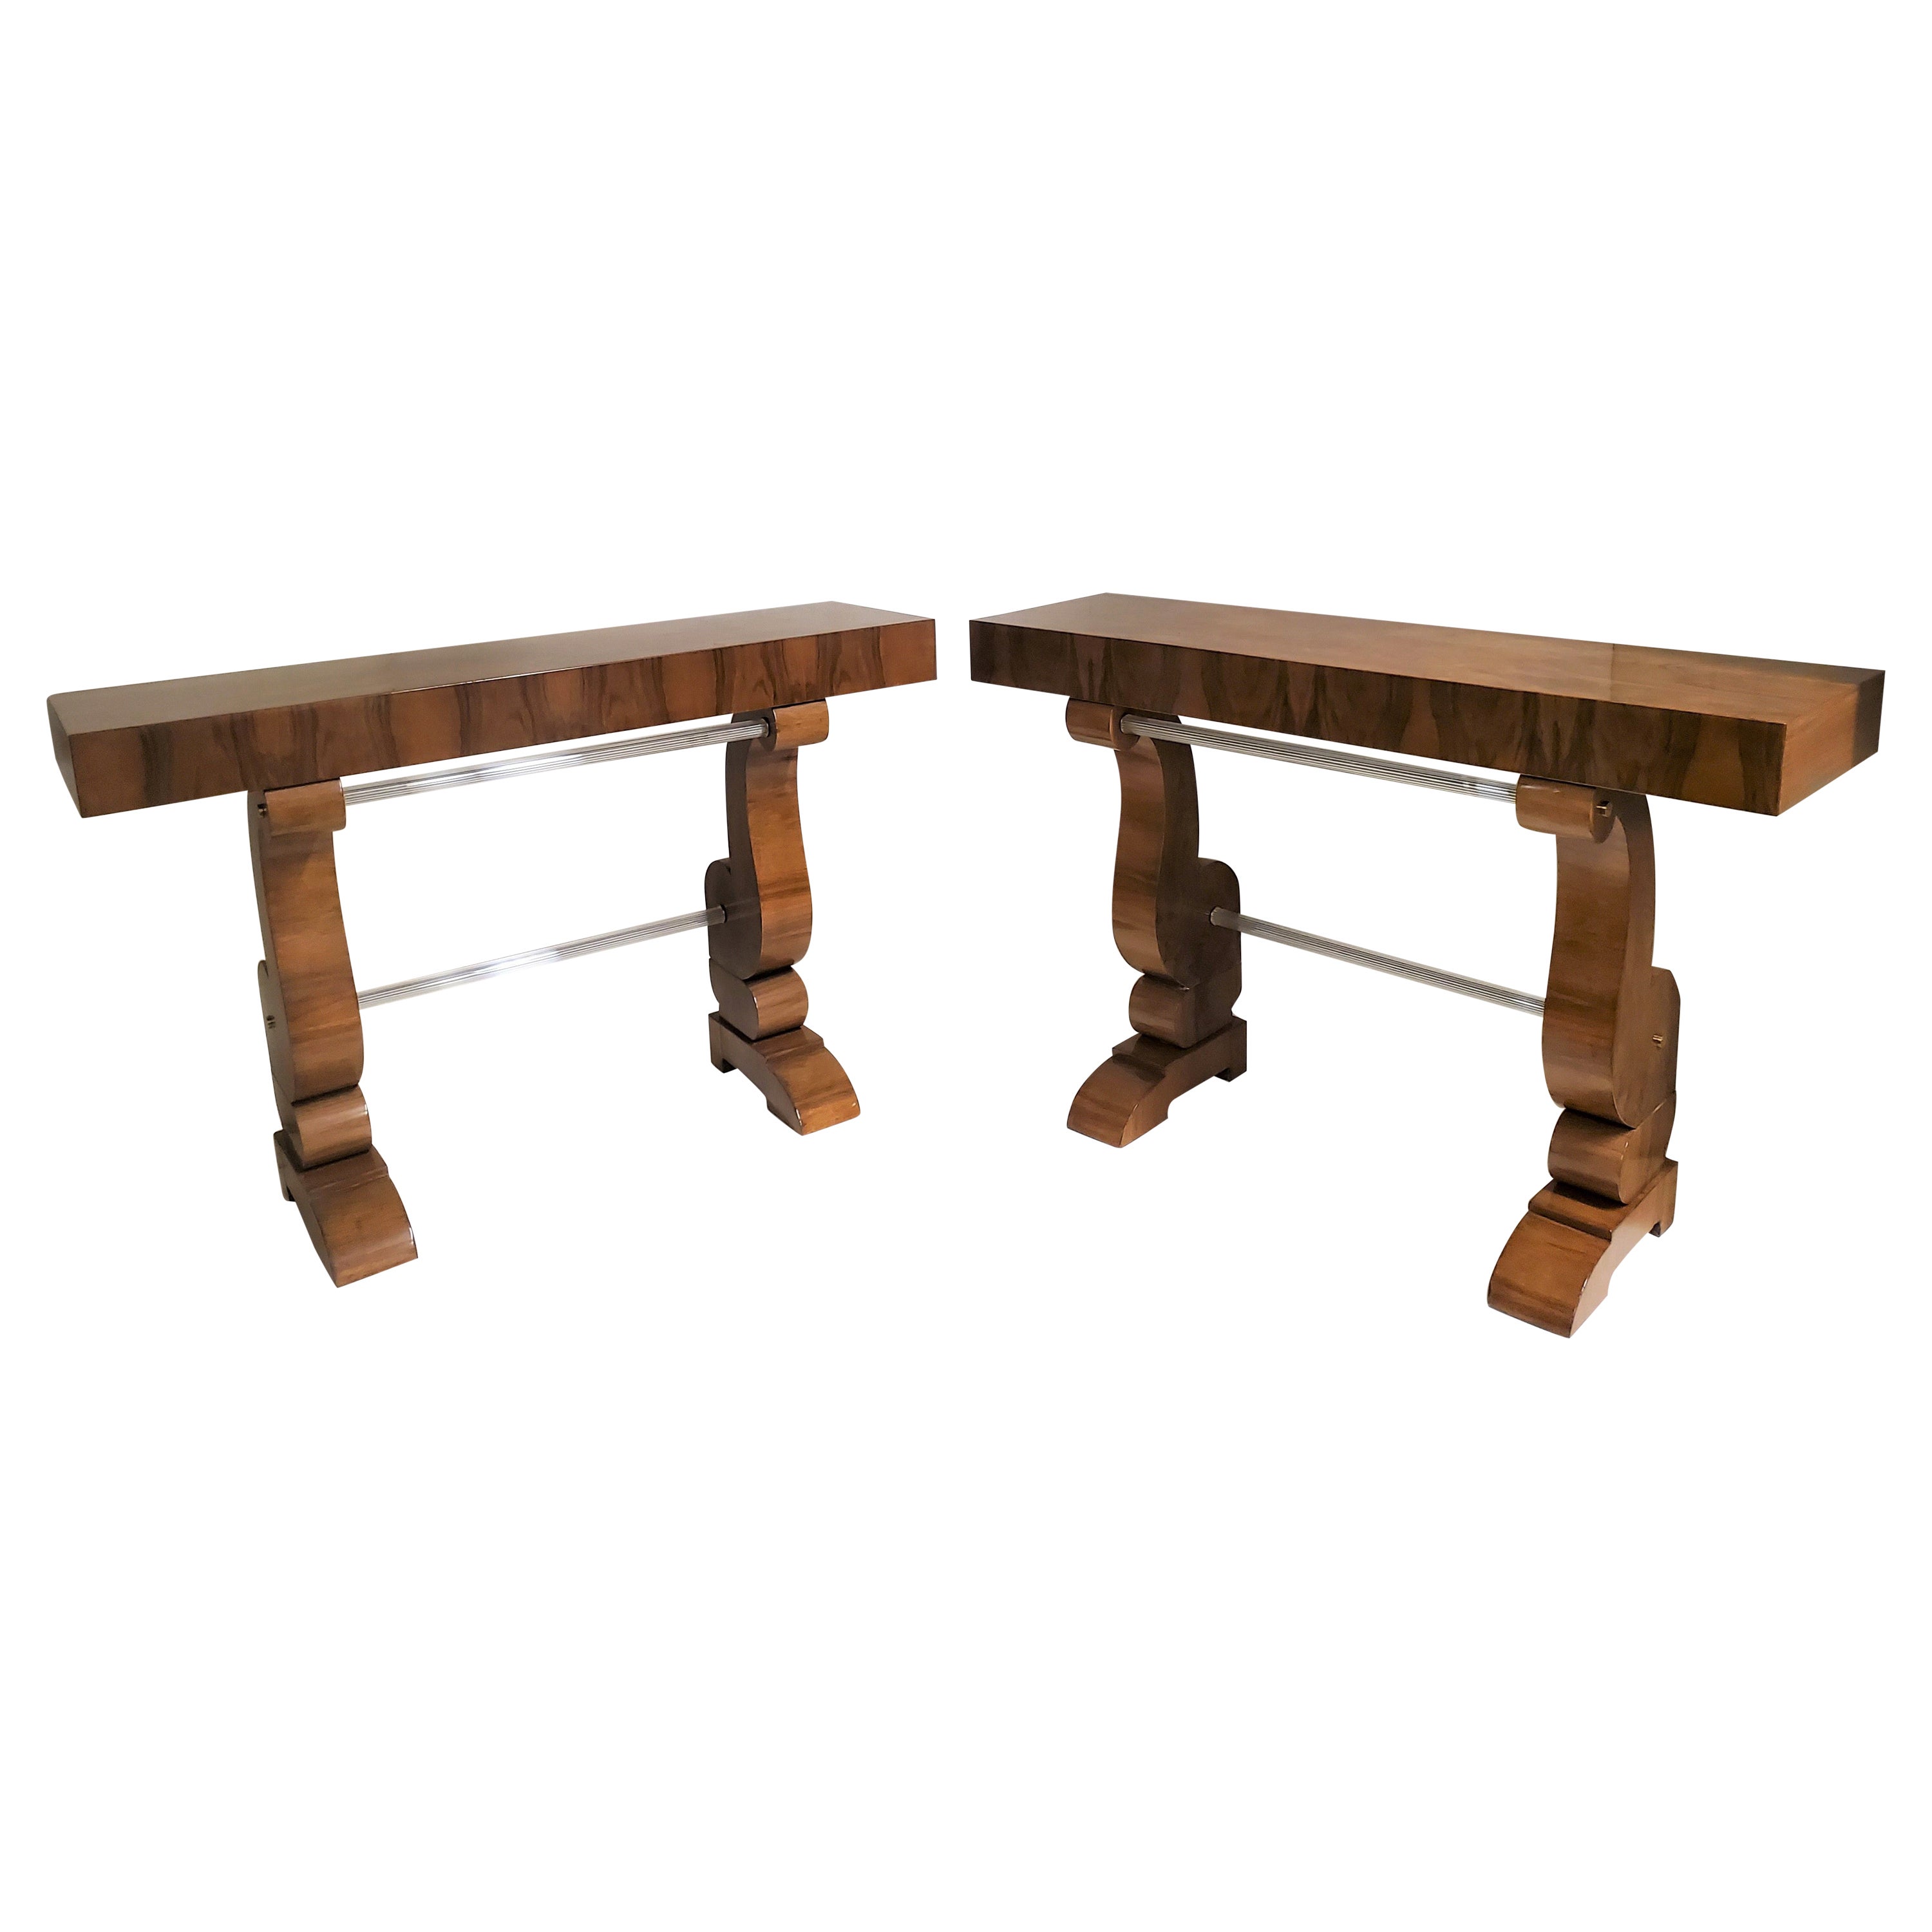 Pair of Original French Double Legged Burl Walnut and Glass Consoles For Sale